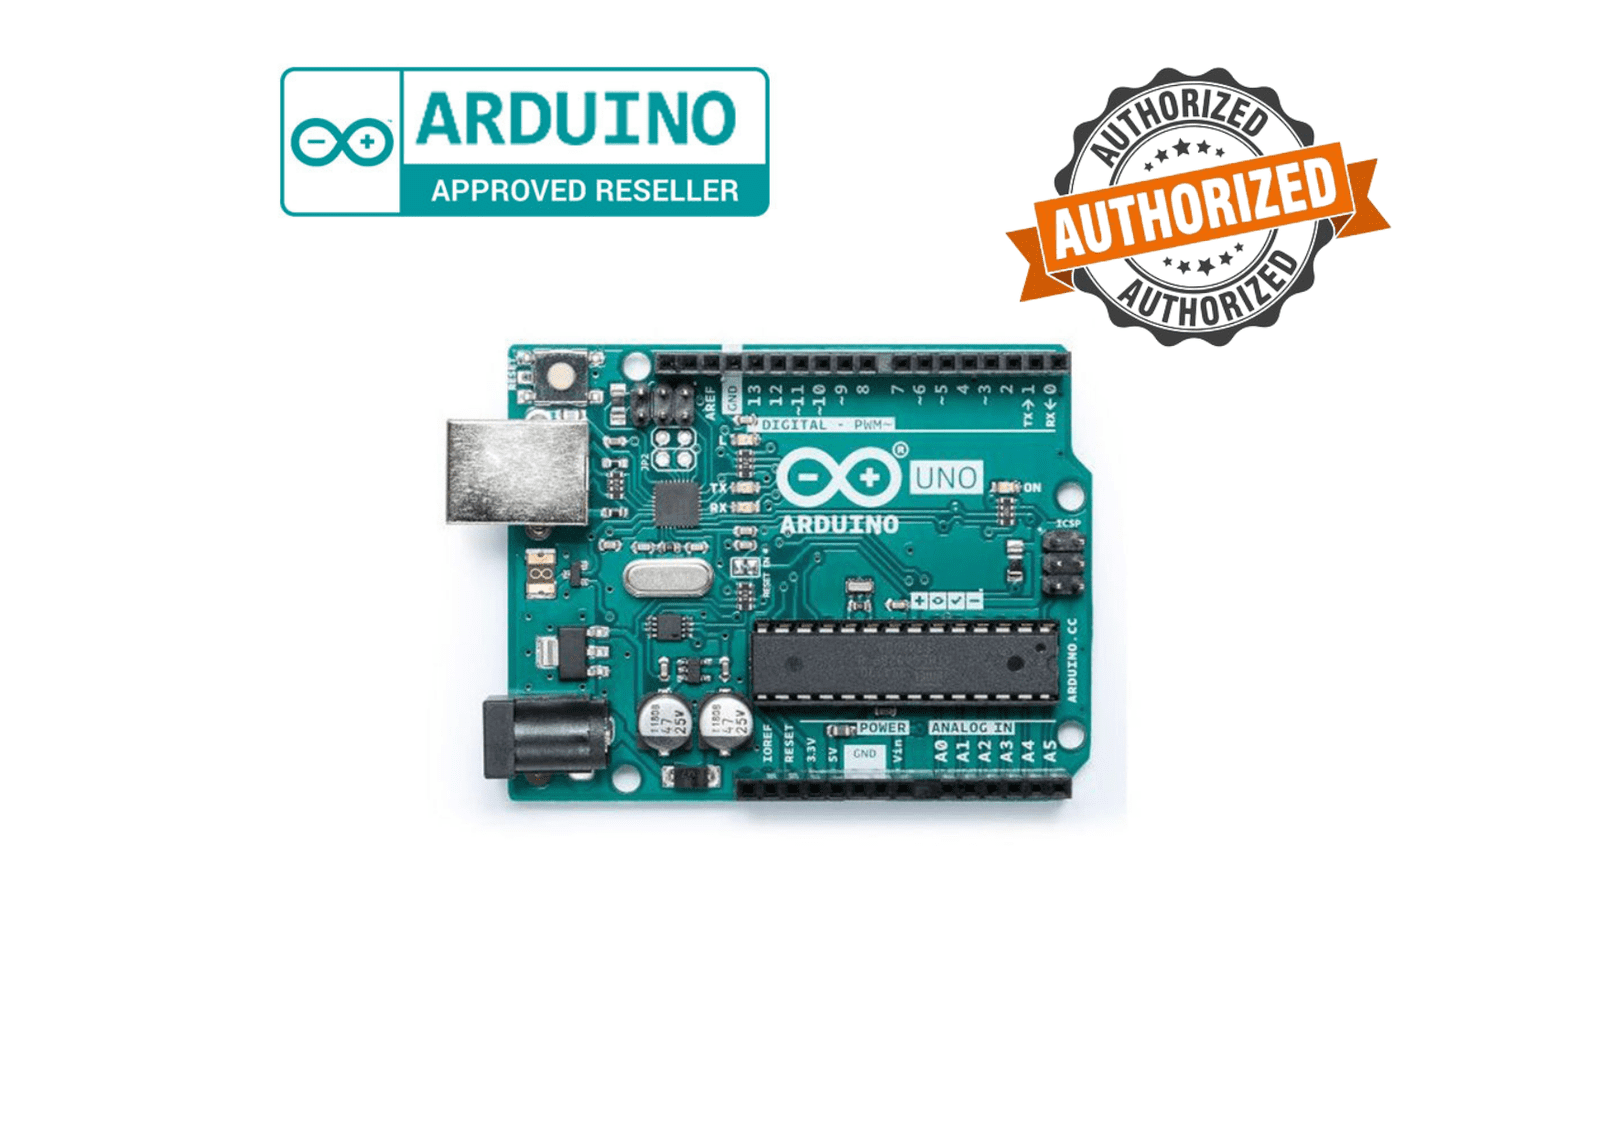 Buy Arduino UNO R3 Development Board with Cable Online at Best